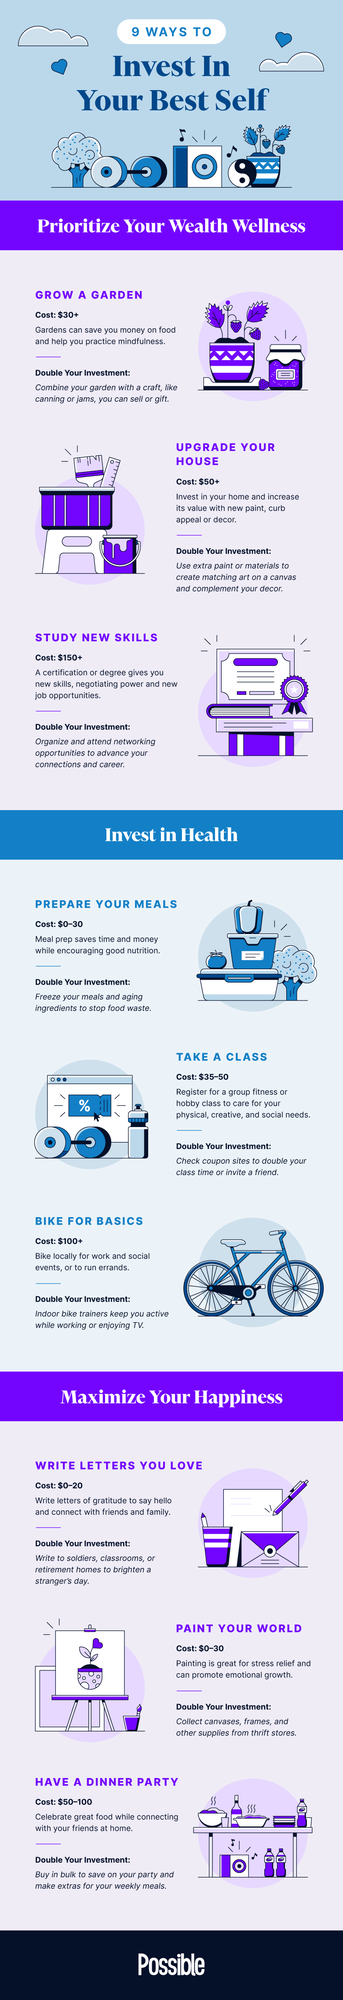 Infographic lists healthy habits to improve your well-being.